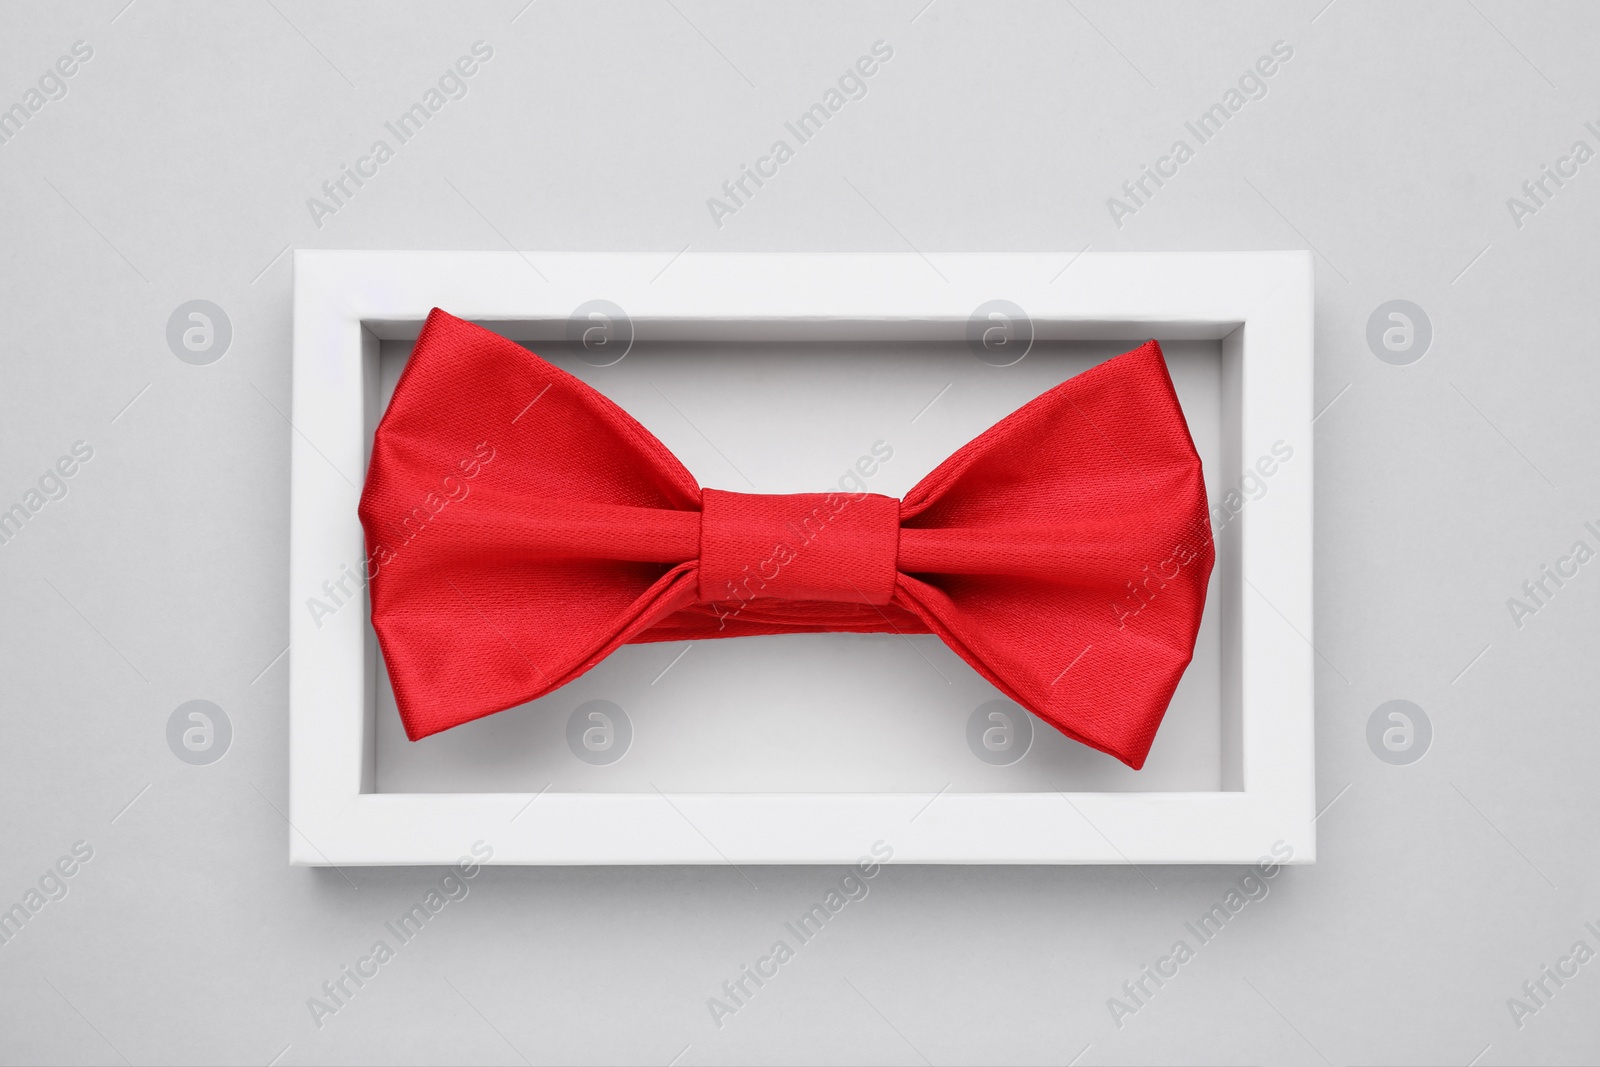 Photo of Stylish red bow tie in box on white background, top view